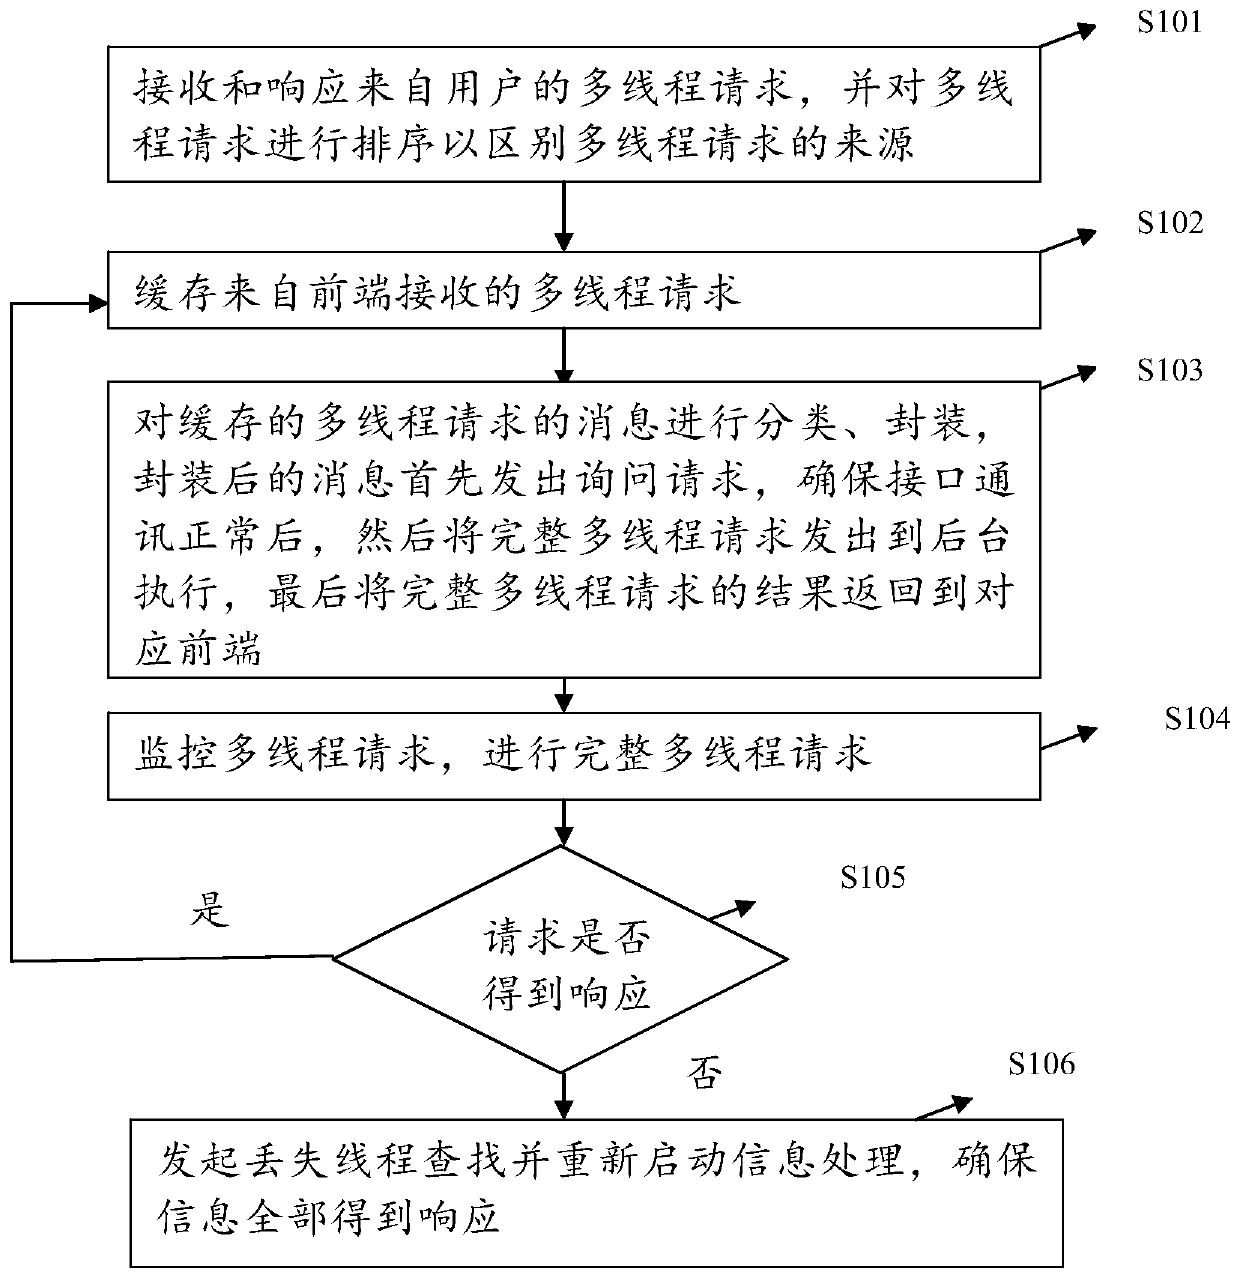 Front-end multi-thread scheduling method and system based on cloud platform